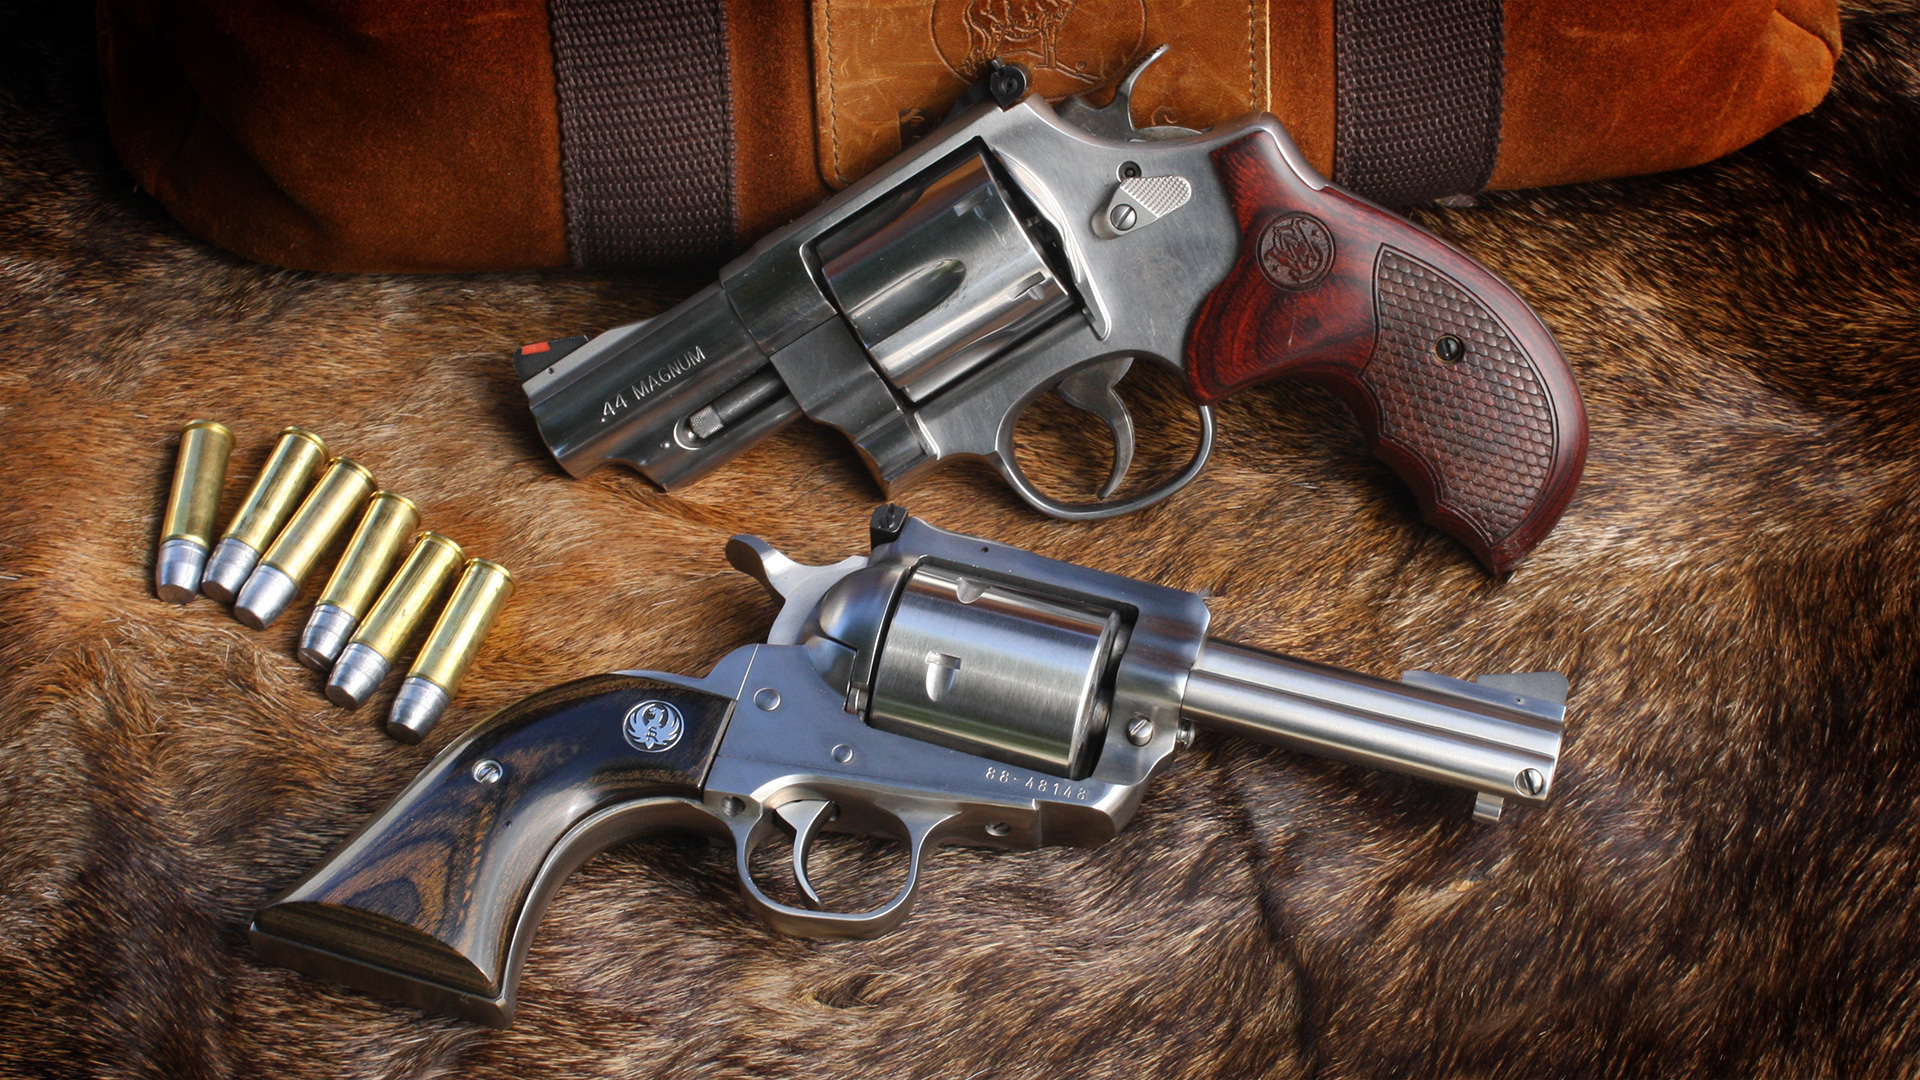 44 Magnum Concealed Carry | An Official Journal Of The NRA